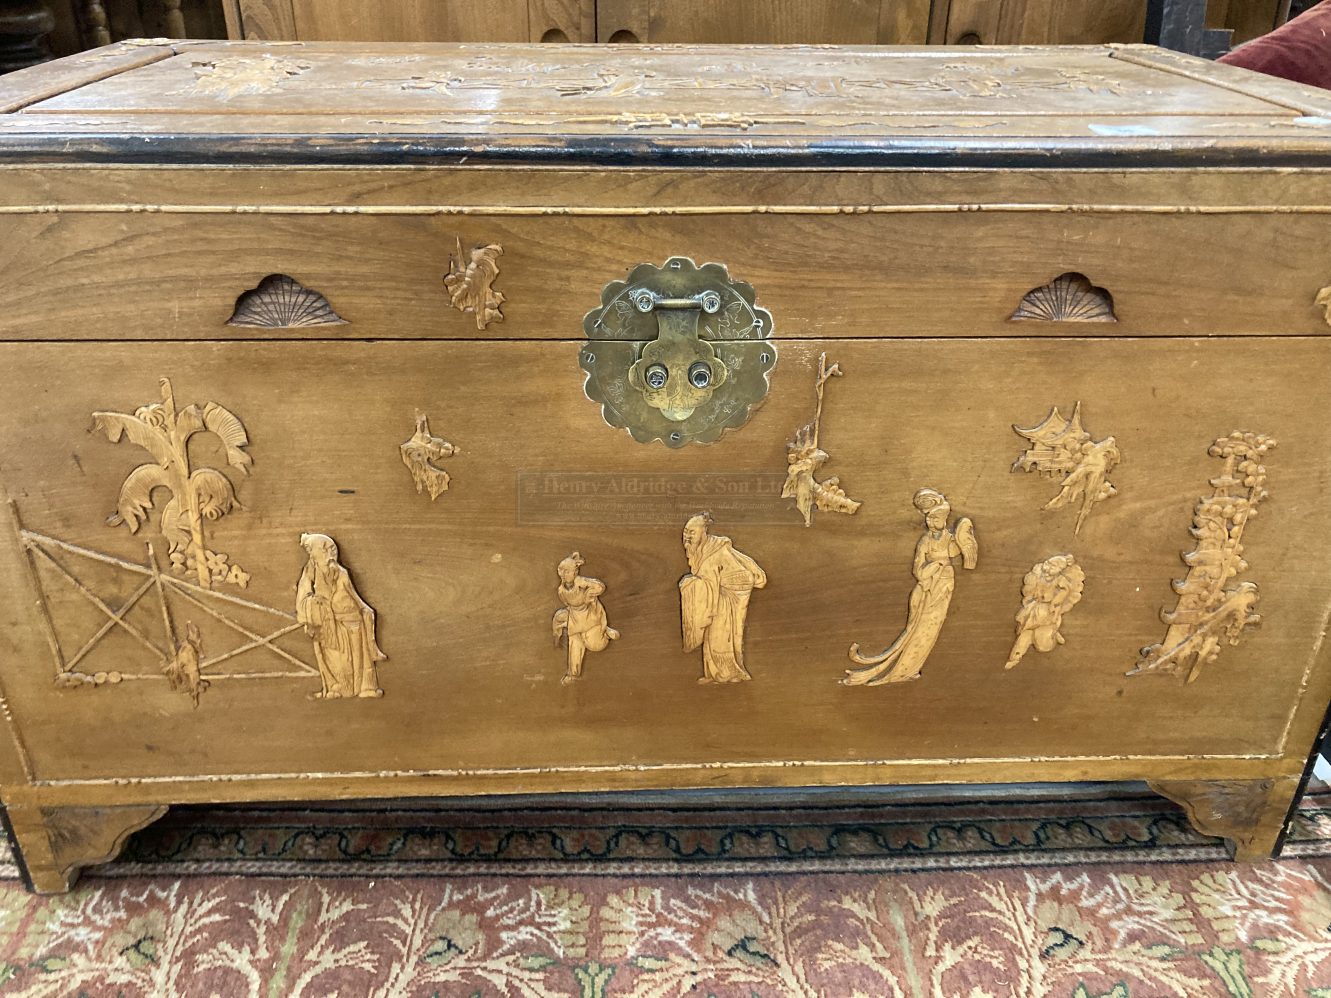 20th cent. Chinese camphor wood marriage chest decorated with stylised figures. 42ins. x 22ins.